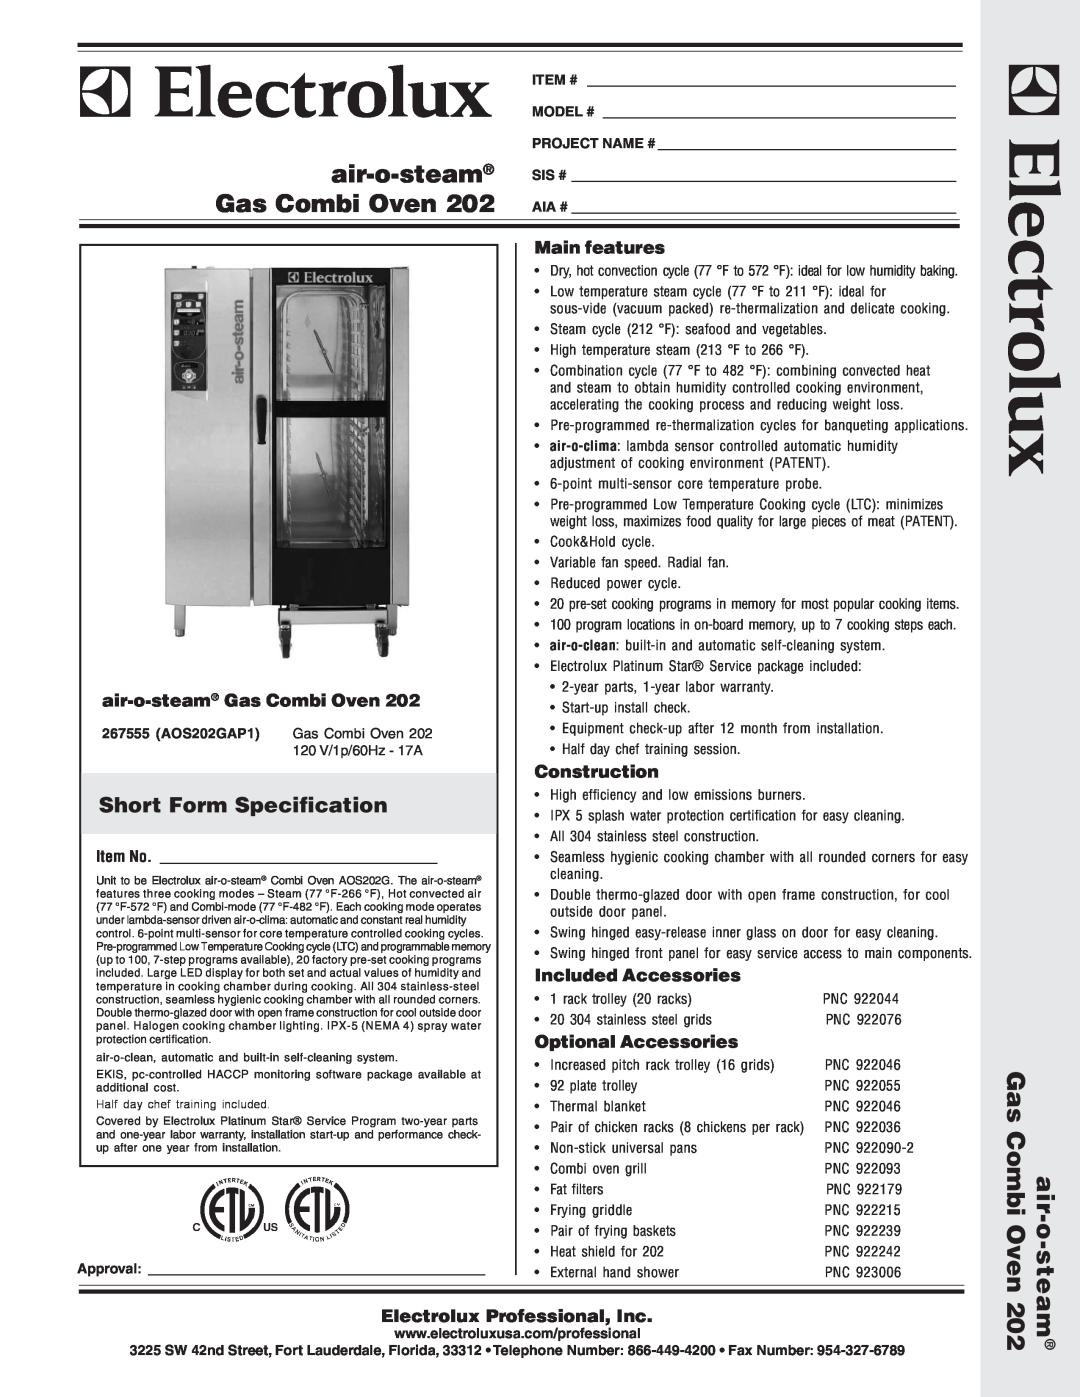 Electrolux AOS202G warranty Short Form Specification, Main features, air-o-steam Gas Combi Oven, Construction, Item # 